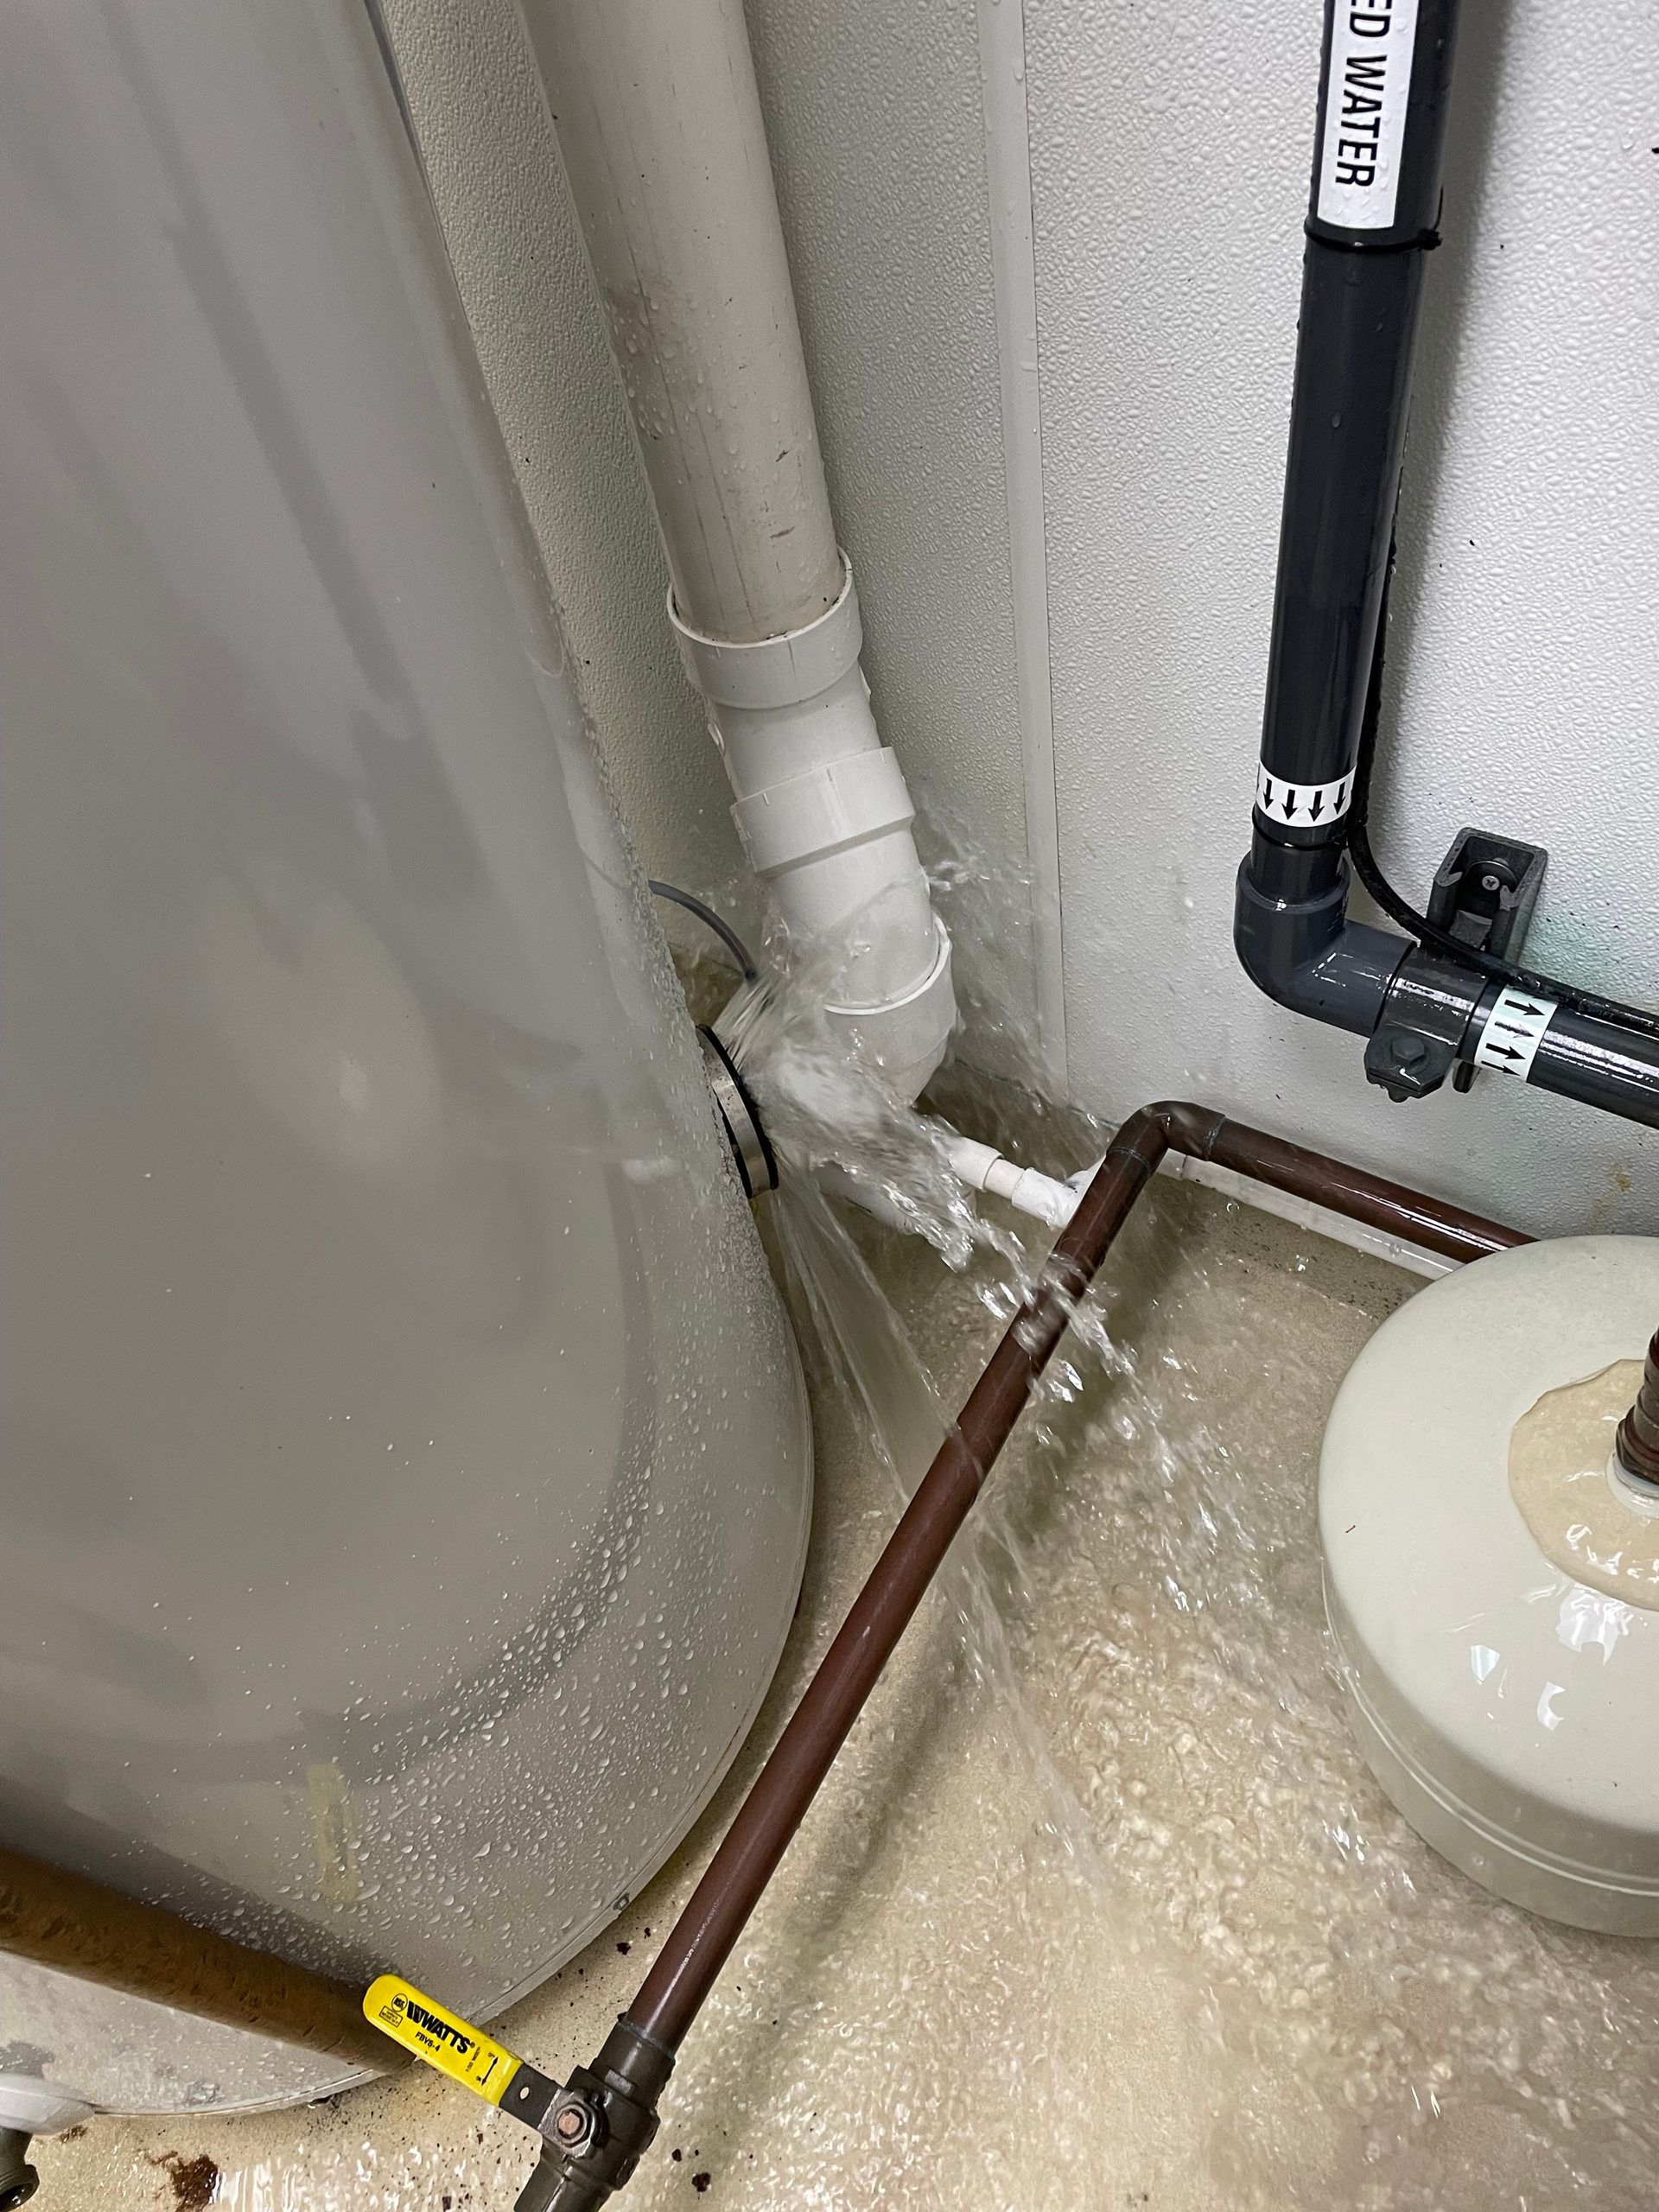 A.O. Smith Commercial Water Heater - Leaking from Condensate Exhaust Elbow